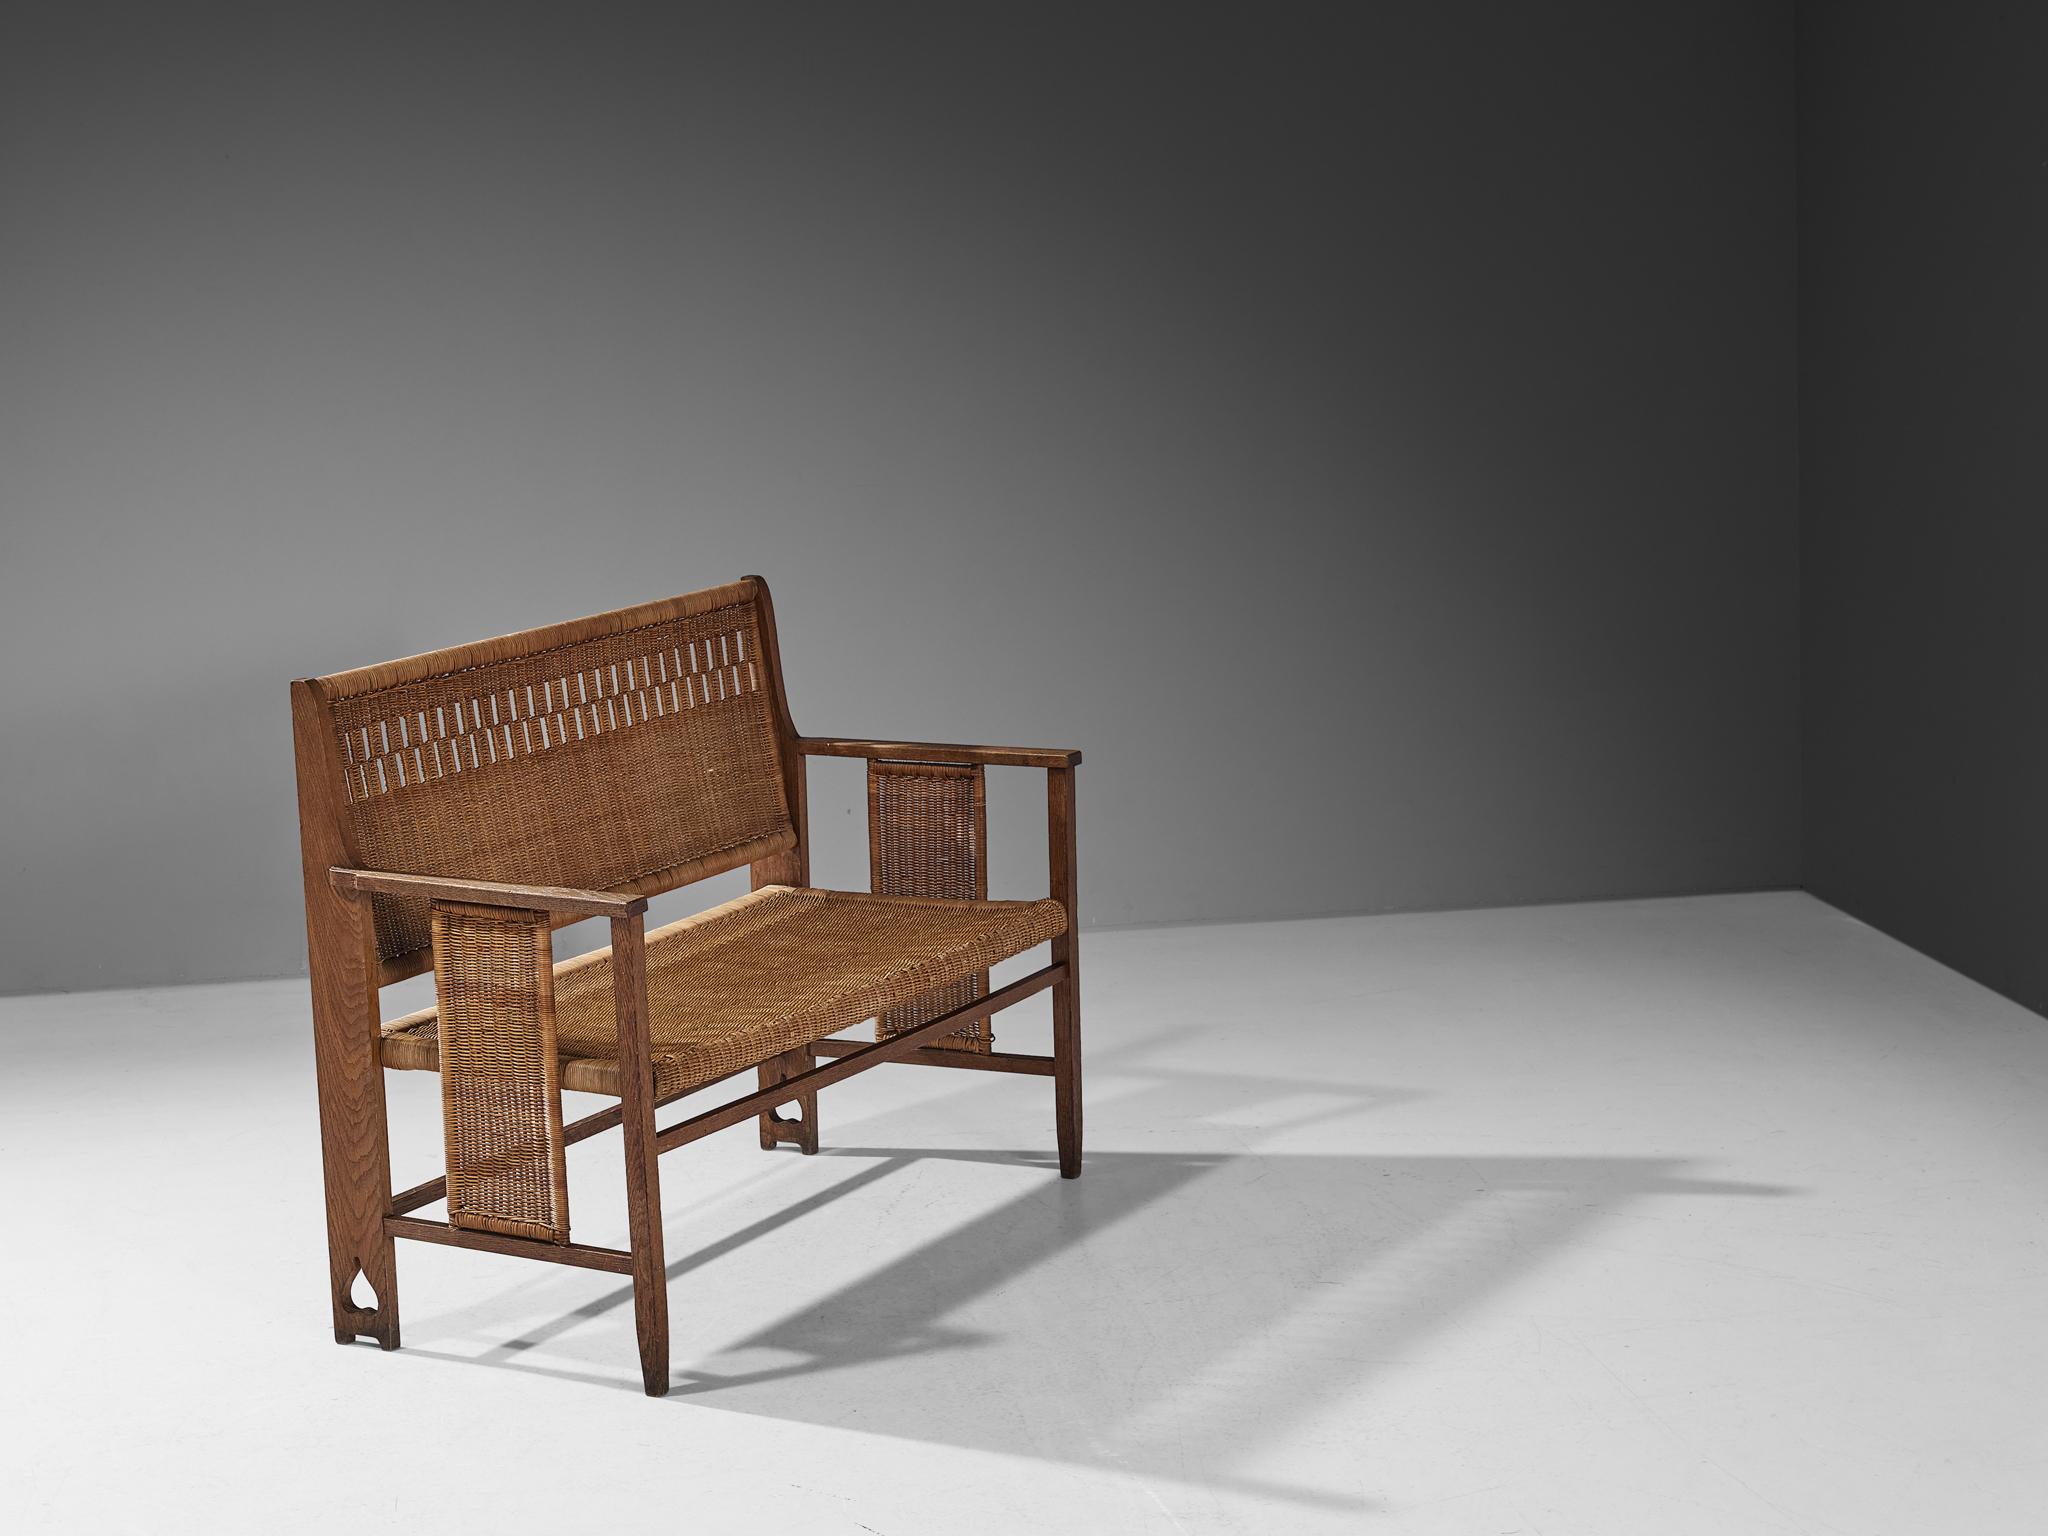 Bench, oak, cane, Austria, 1920s

This eloquent bench is designed during the Arts & Crafts period in Germany/Austria approximately around the twenties and designed by an experienced craftsmen whose identity is unfortunately not yet known. The